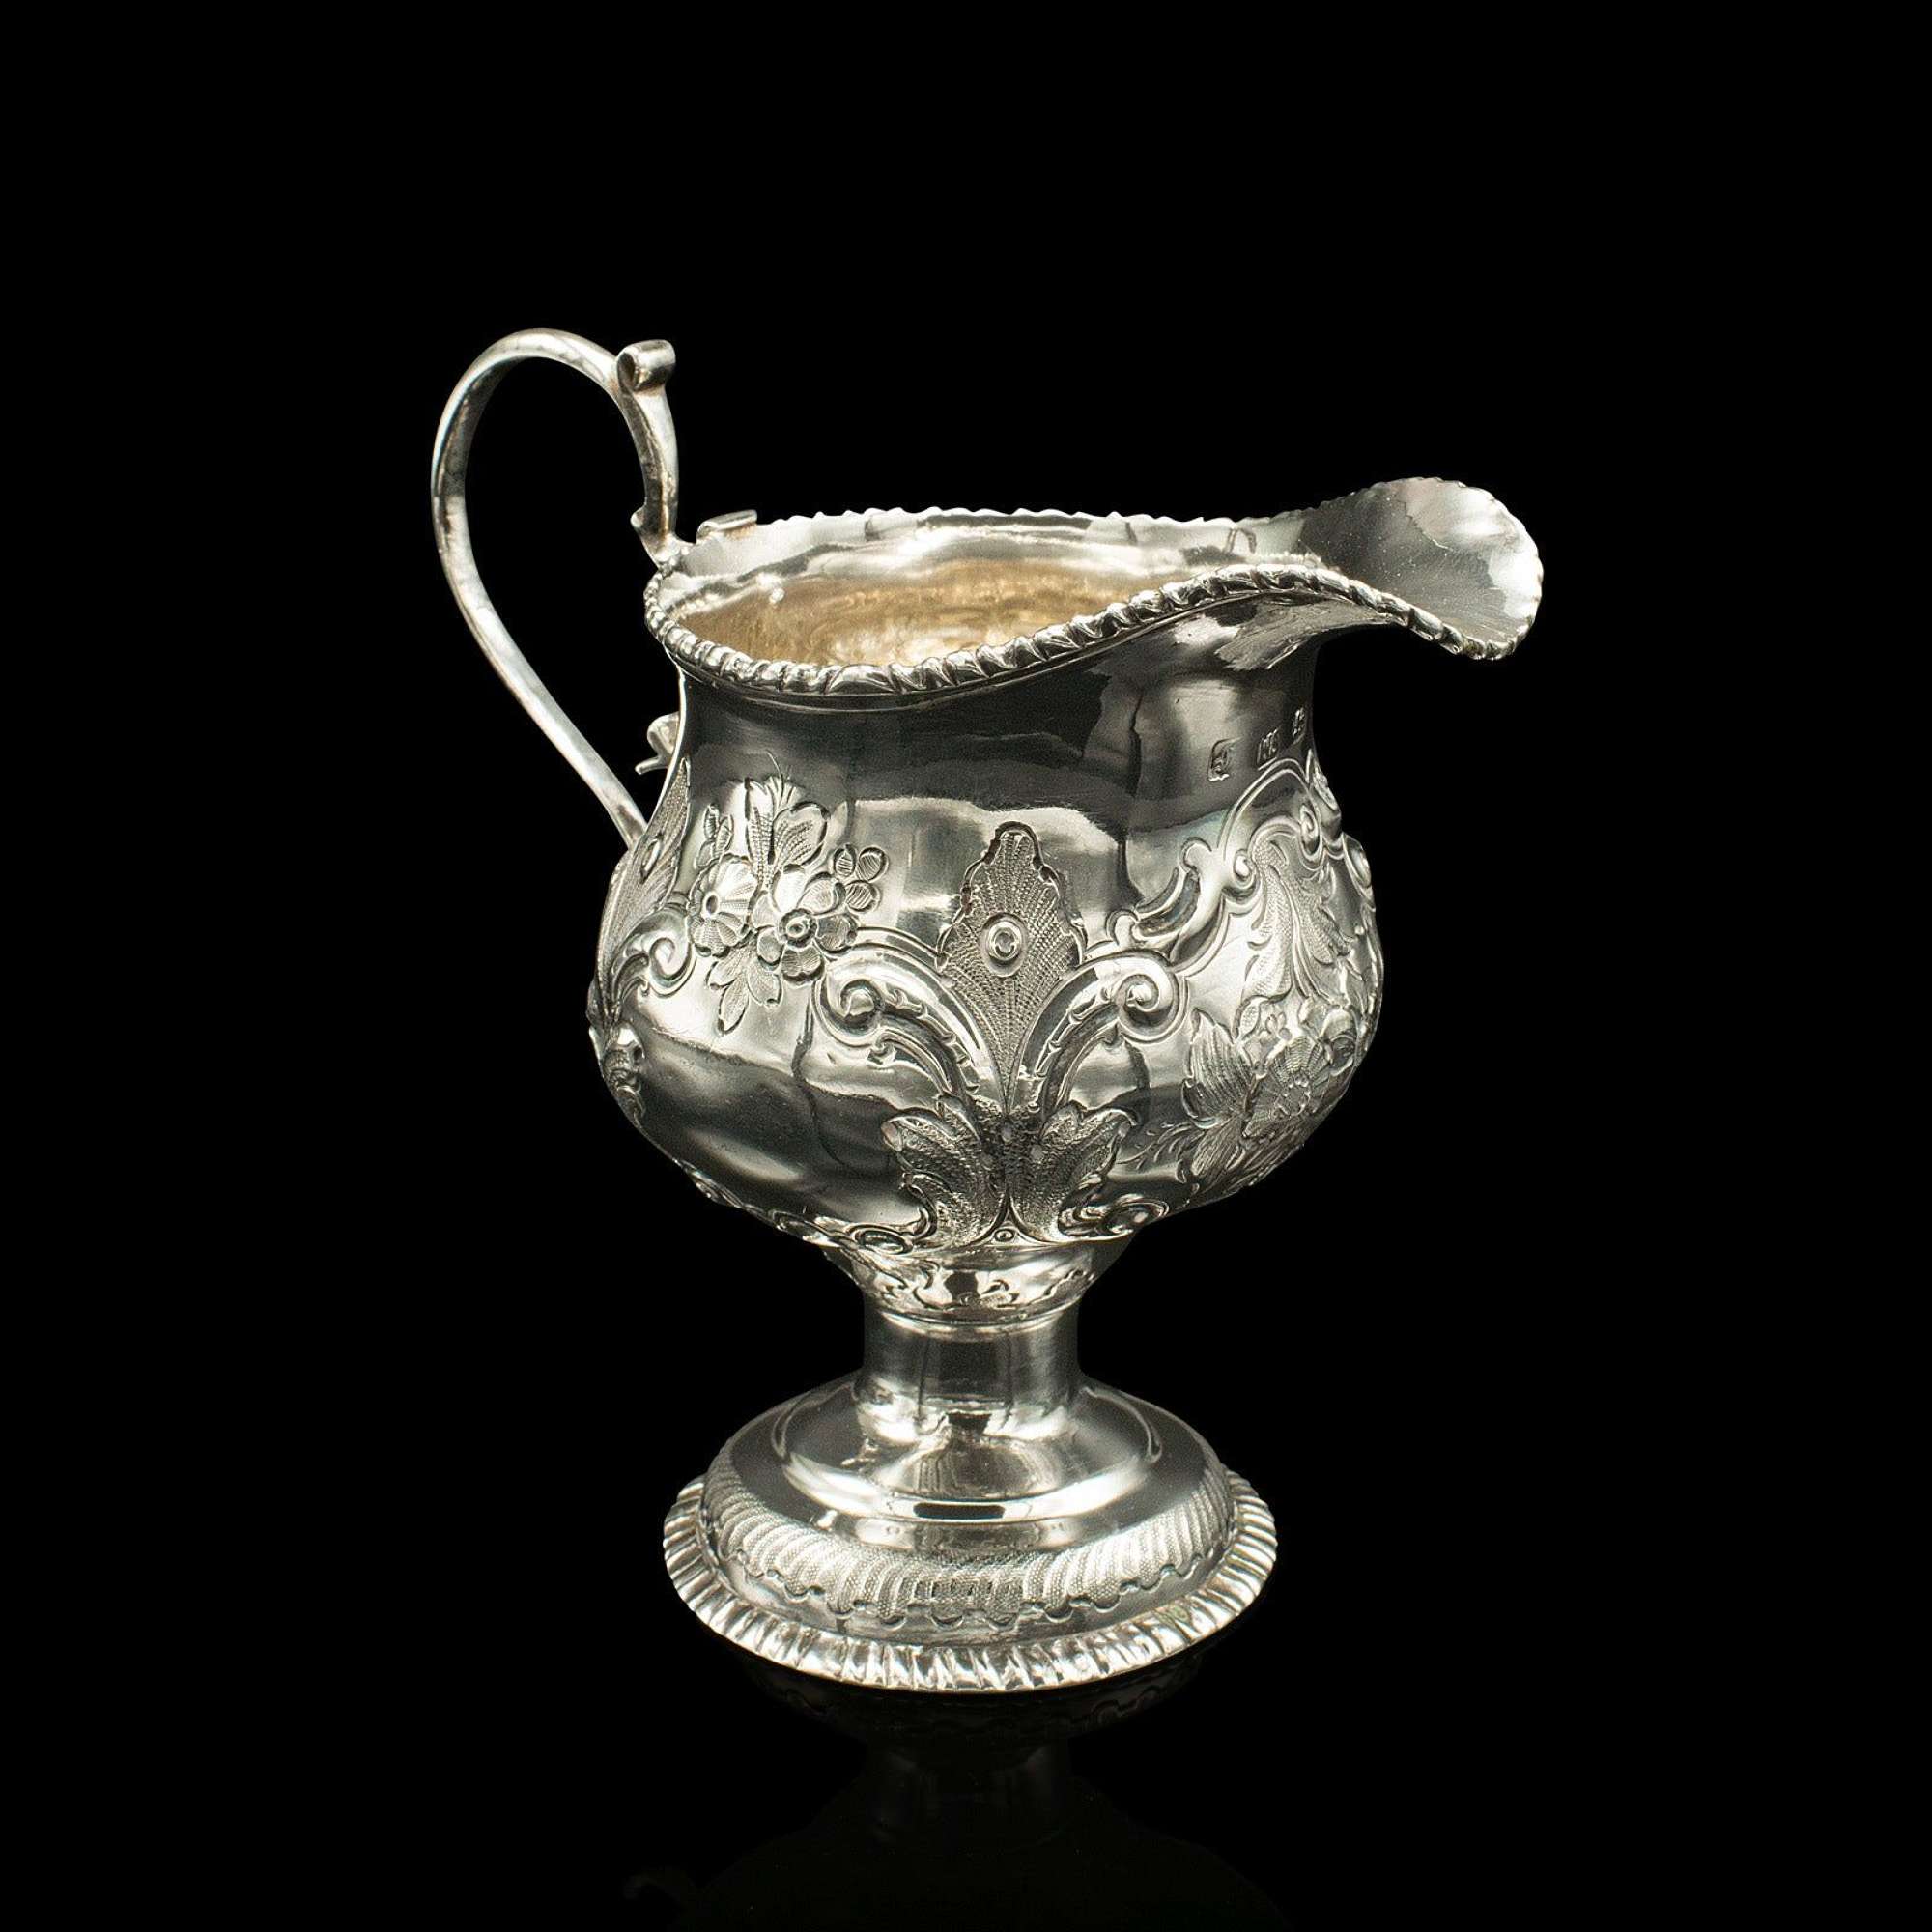 Small Antique Creamer, English Sterling Silver Pouring Jug, Georgian, Hallmarked